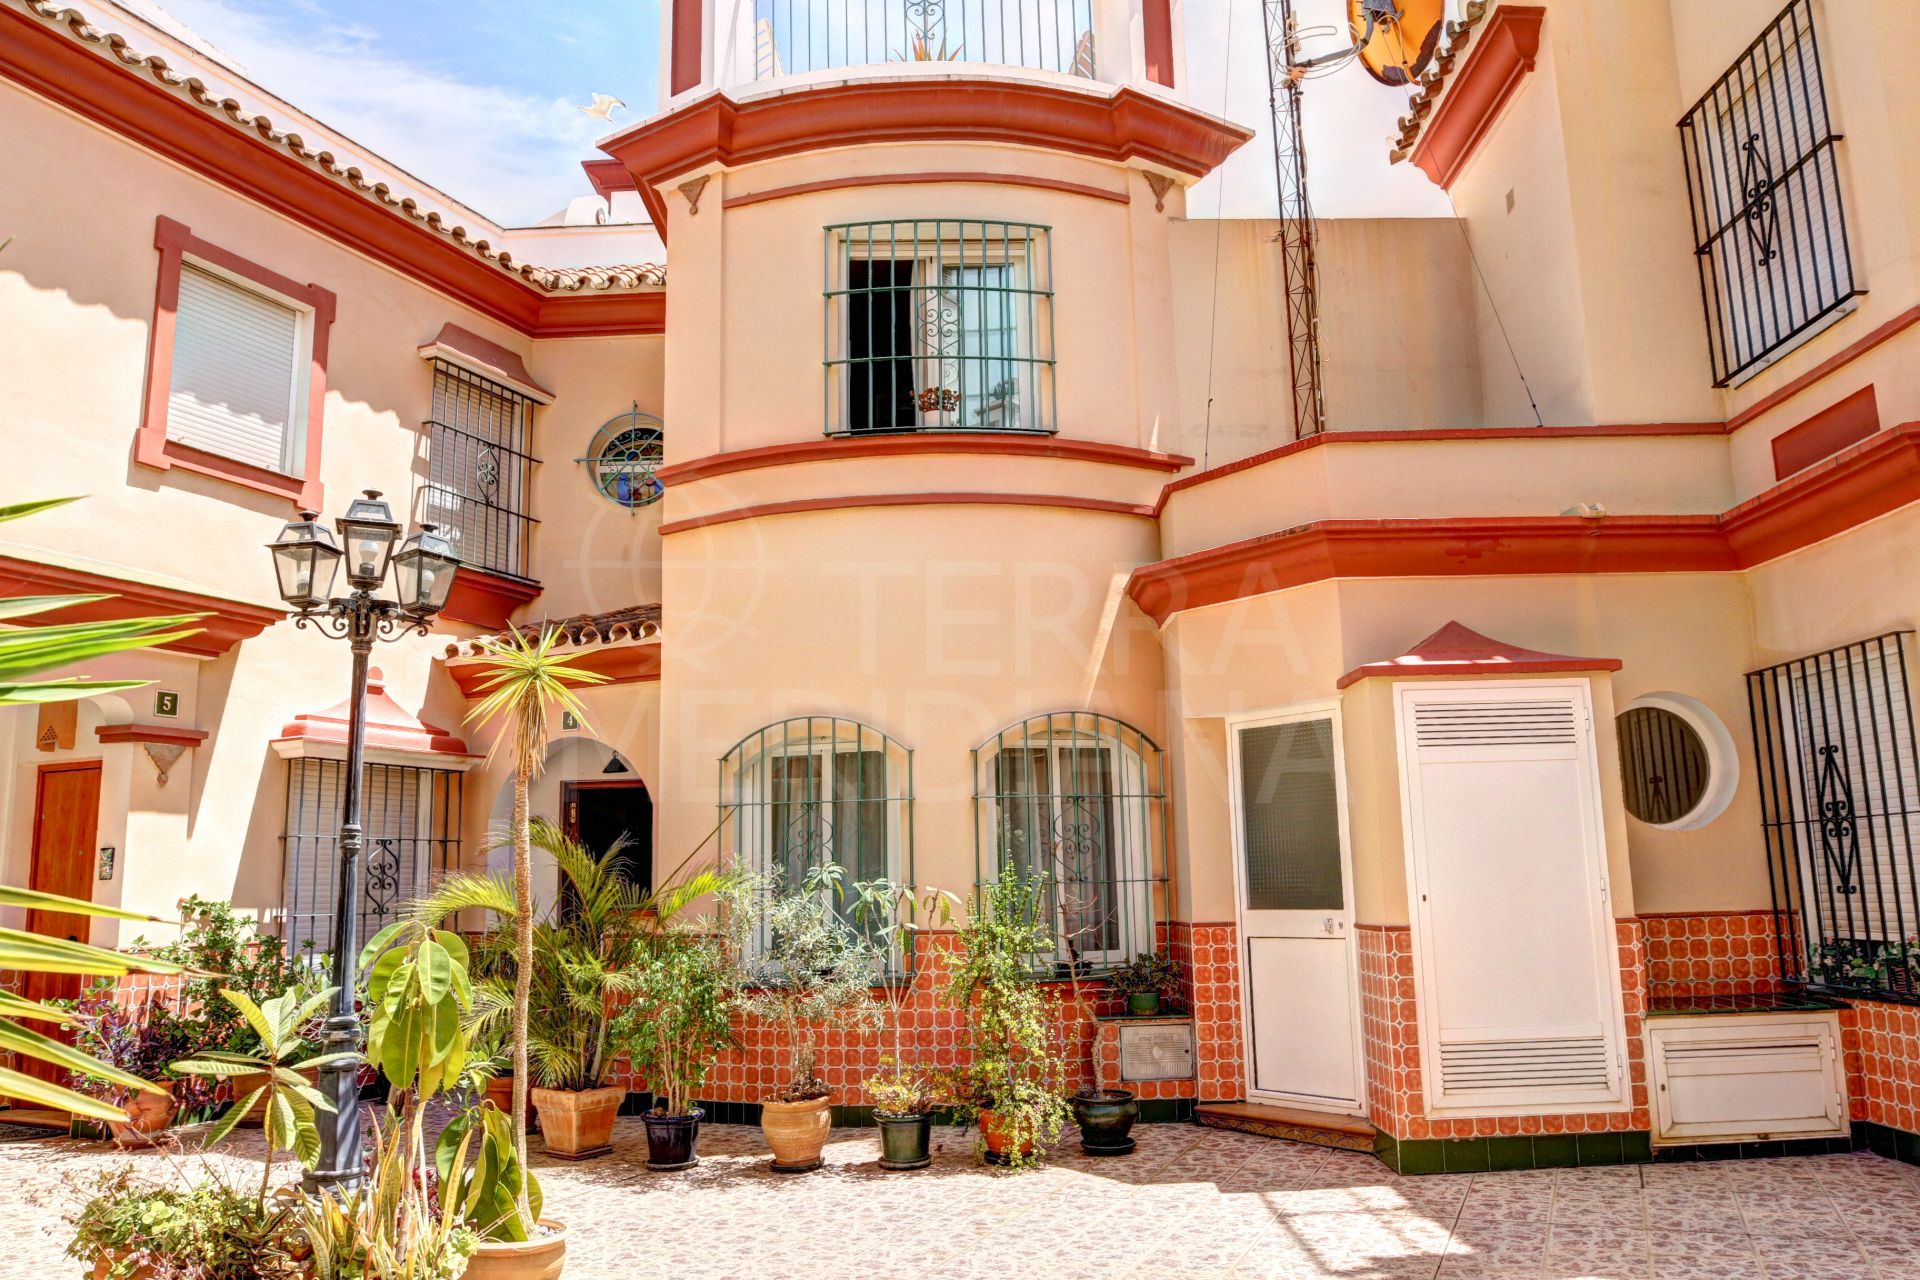 Townhouse for sale in a gated community with private parking and storage, Estepona old town